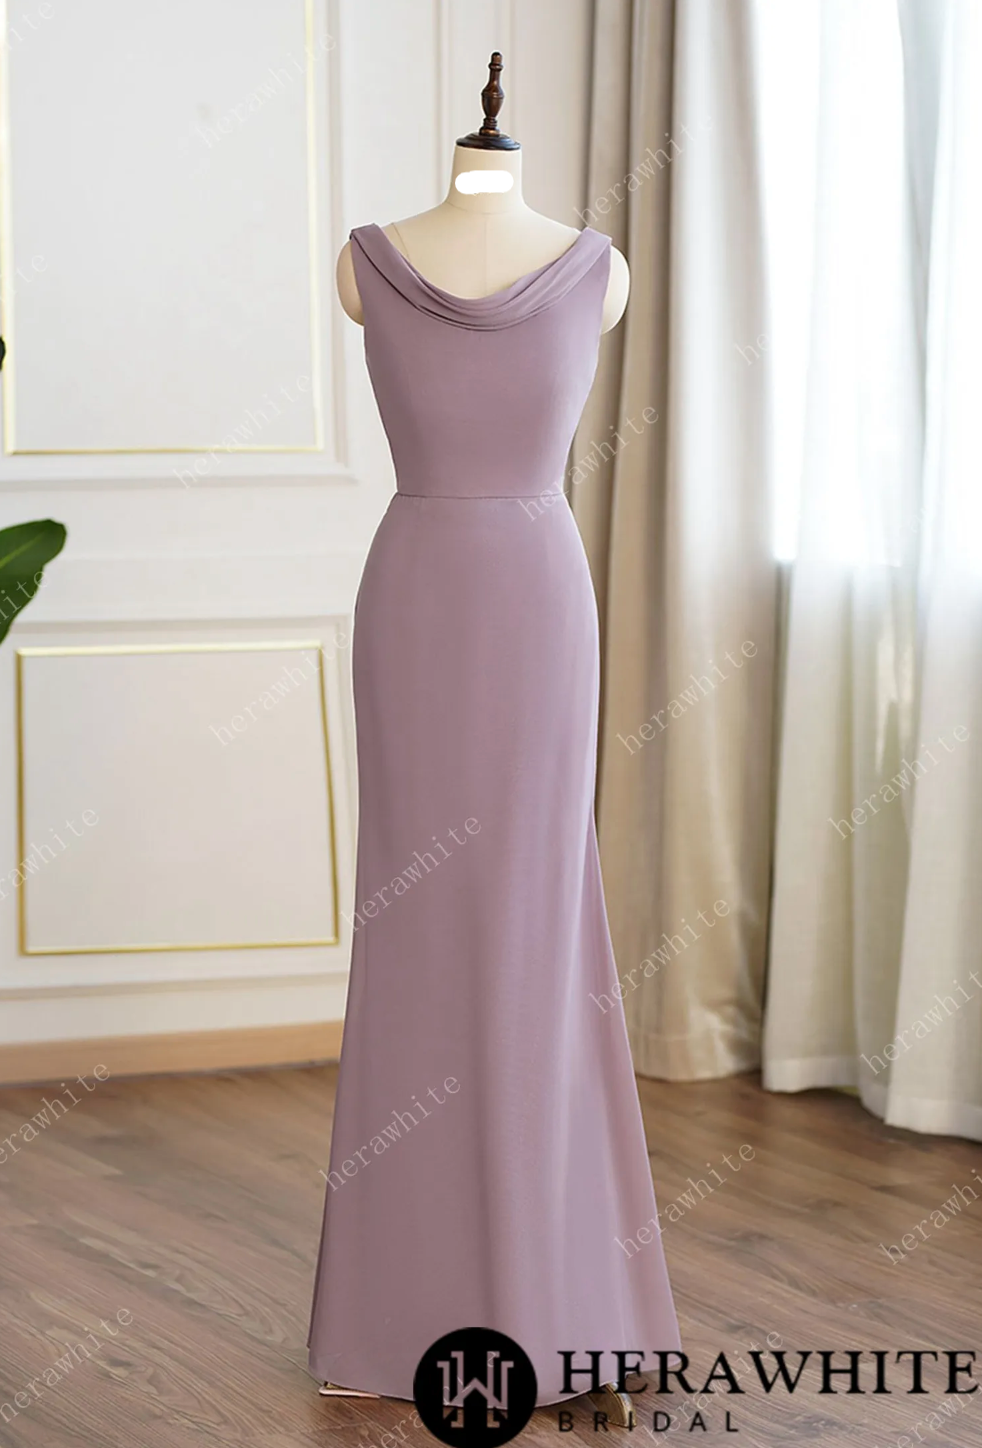 Buy Women Lavender Wedding Bridesmaid Dresses Off Shoulder Long Sleeve with  Slit Lace Chiffon Prom Formal Dress at Amazon.in